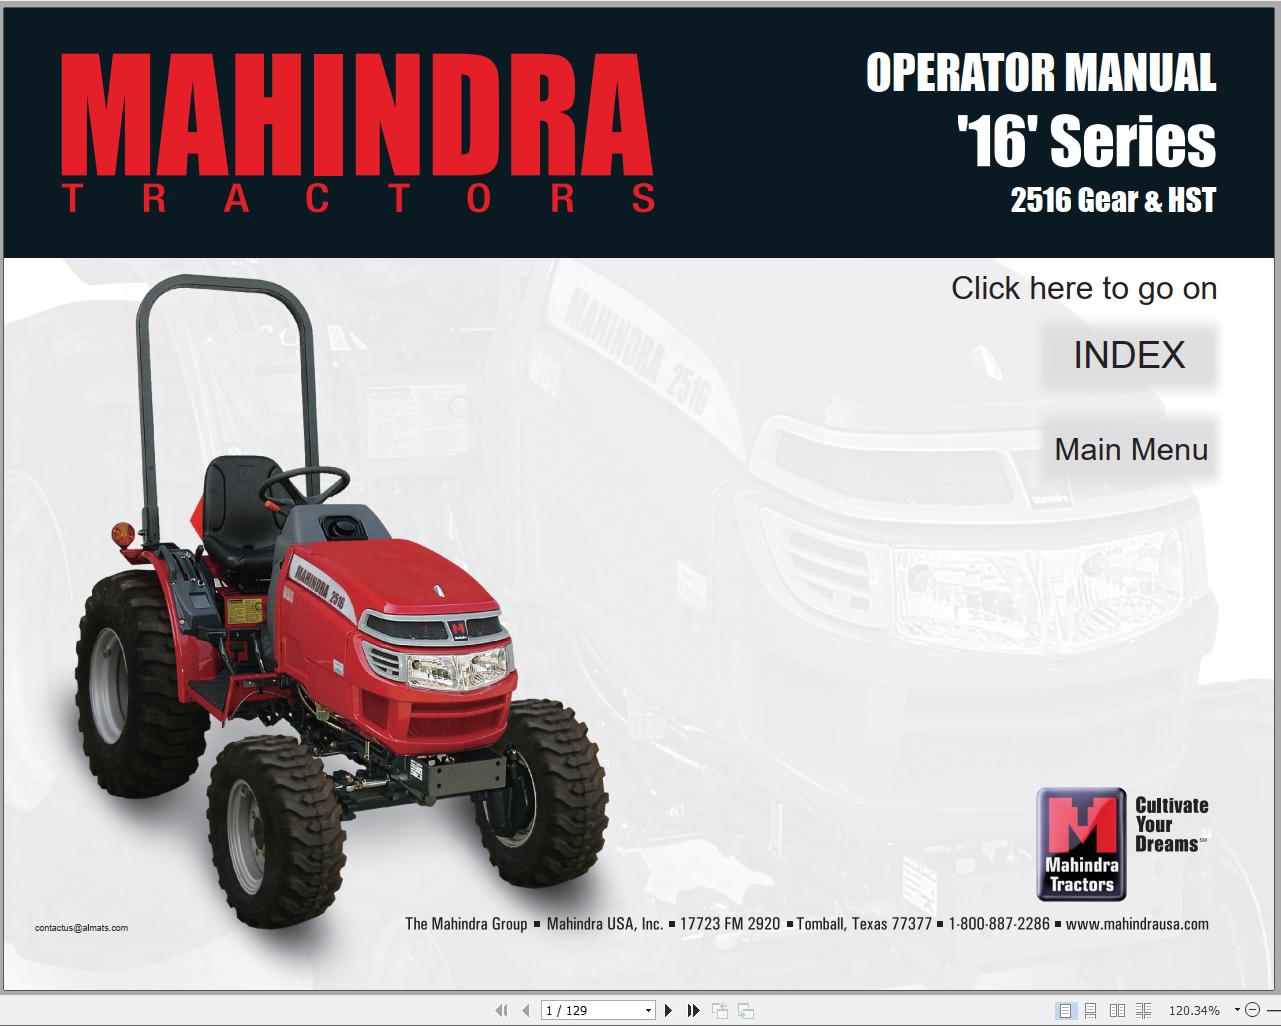 Mahindra Tractor 16 Series 2516 Gear HST Full Operator Manual Fast Download